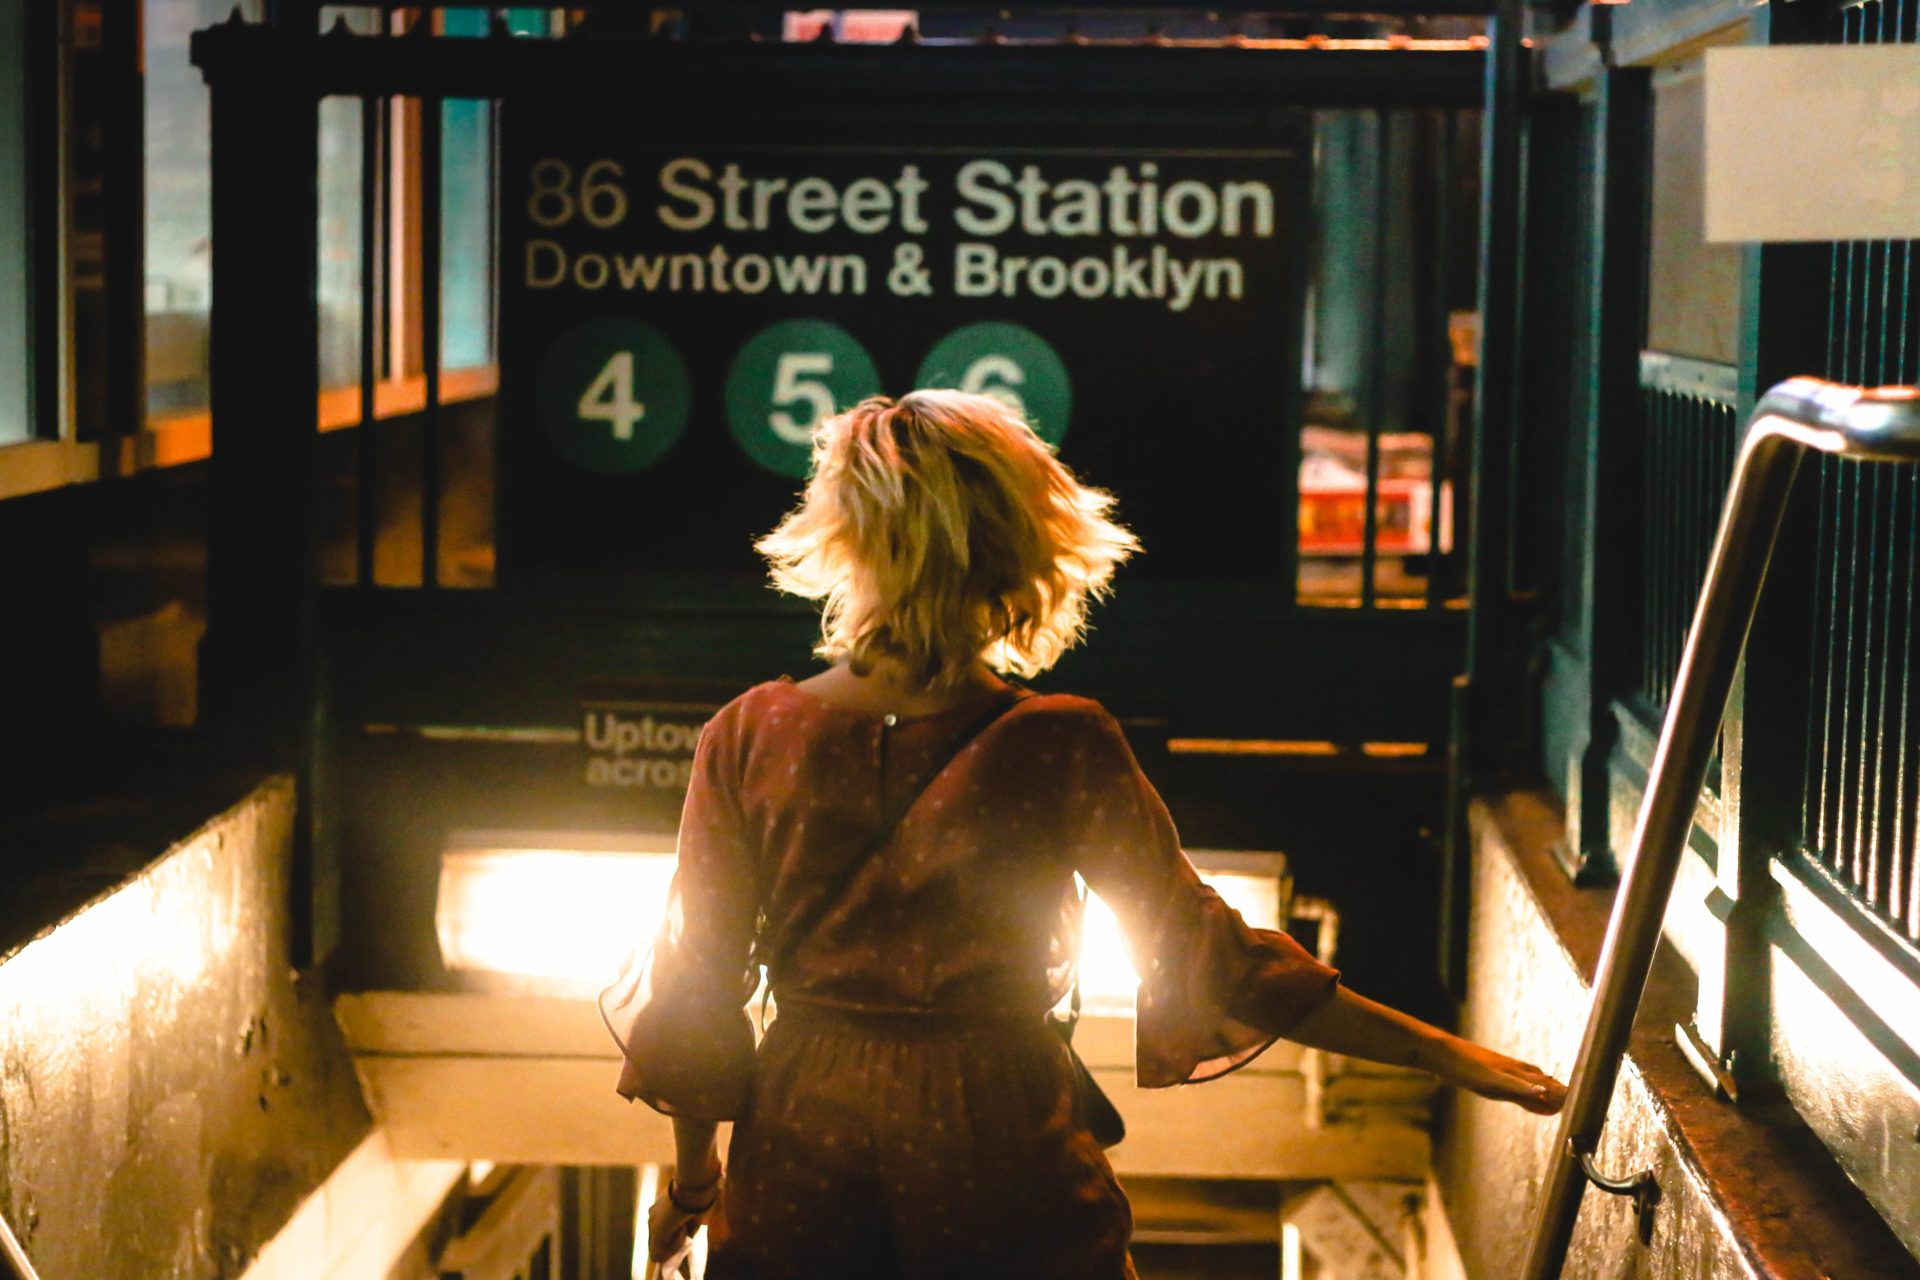 A woman is getting down a subway station in New York City